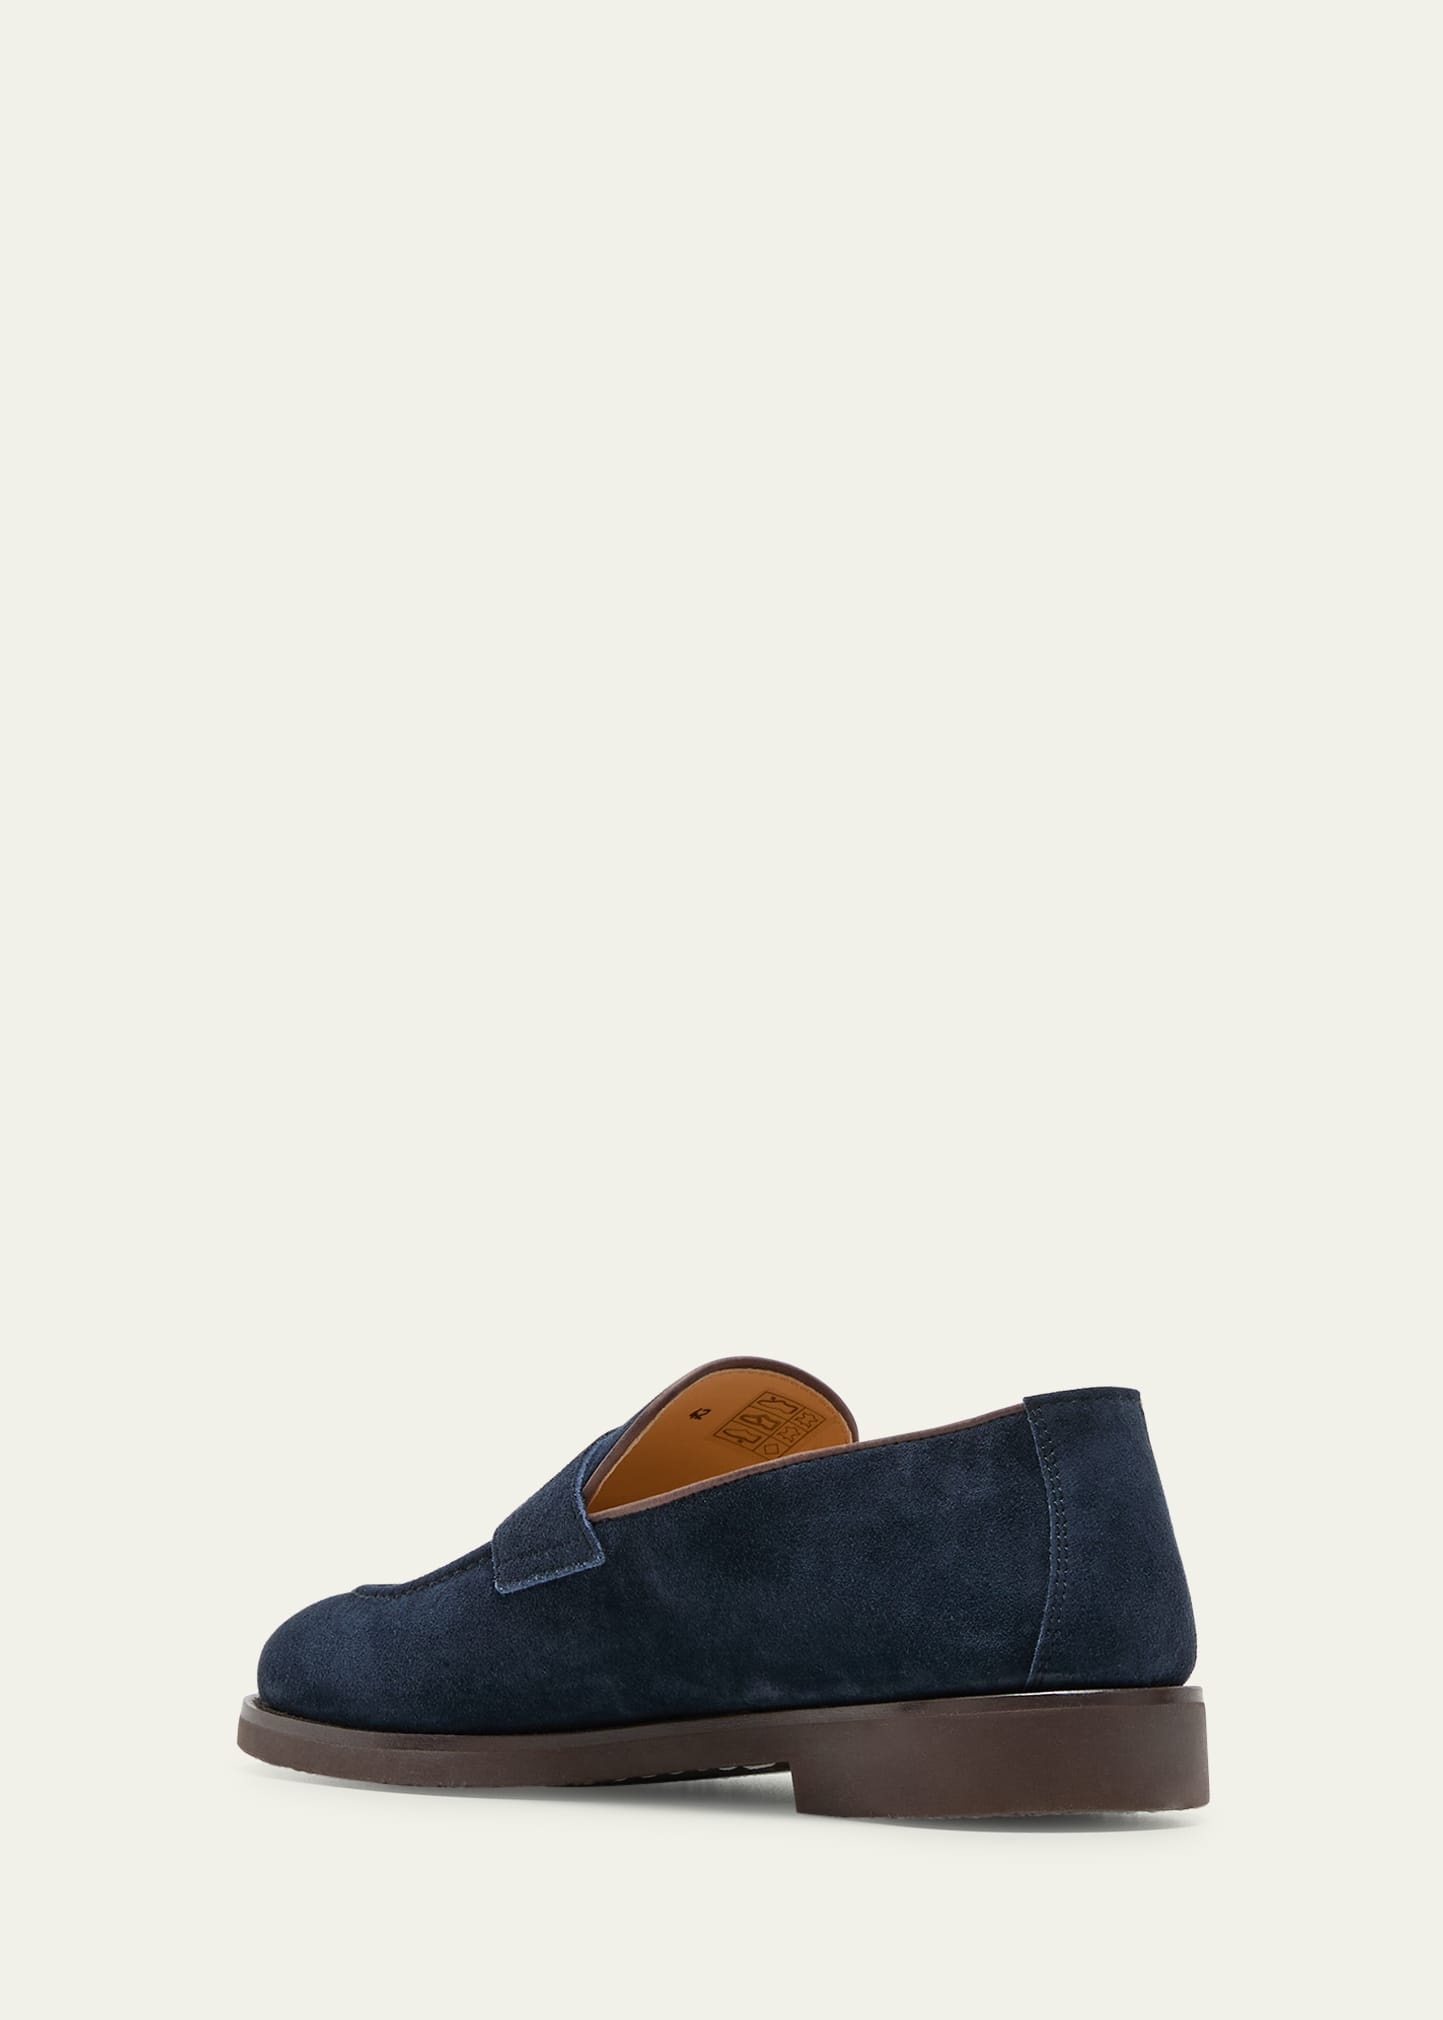 Men's Suede Penny Loafers - 2